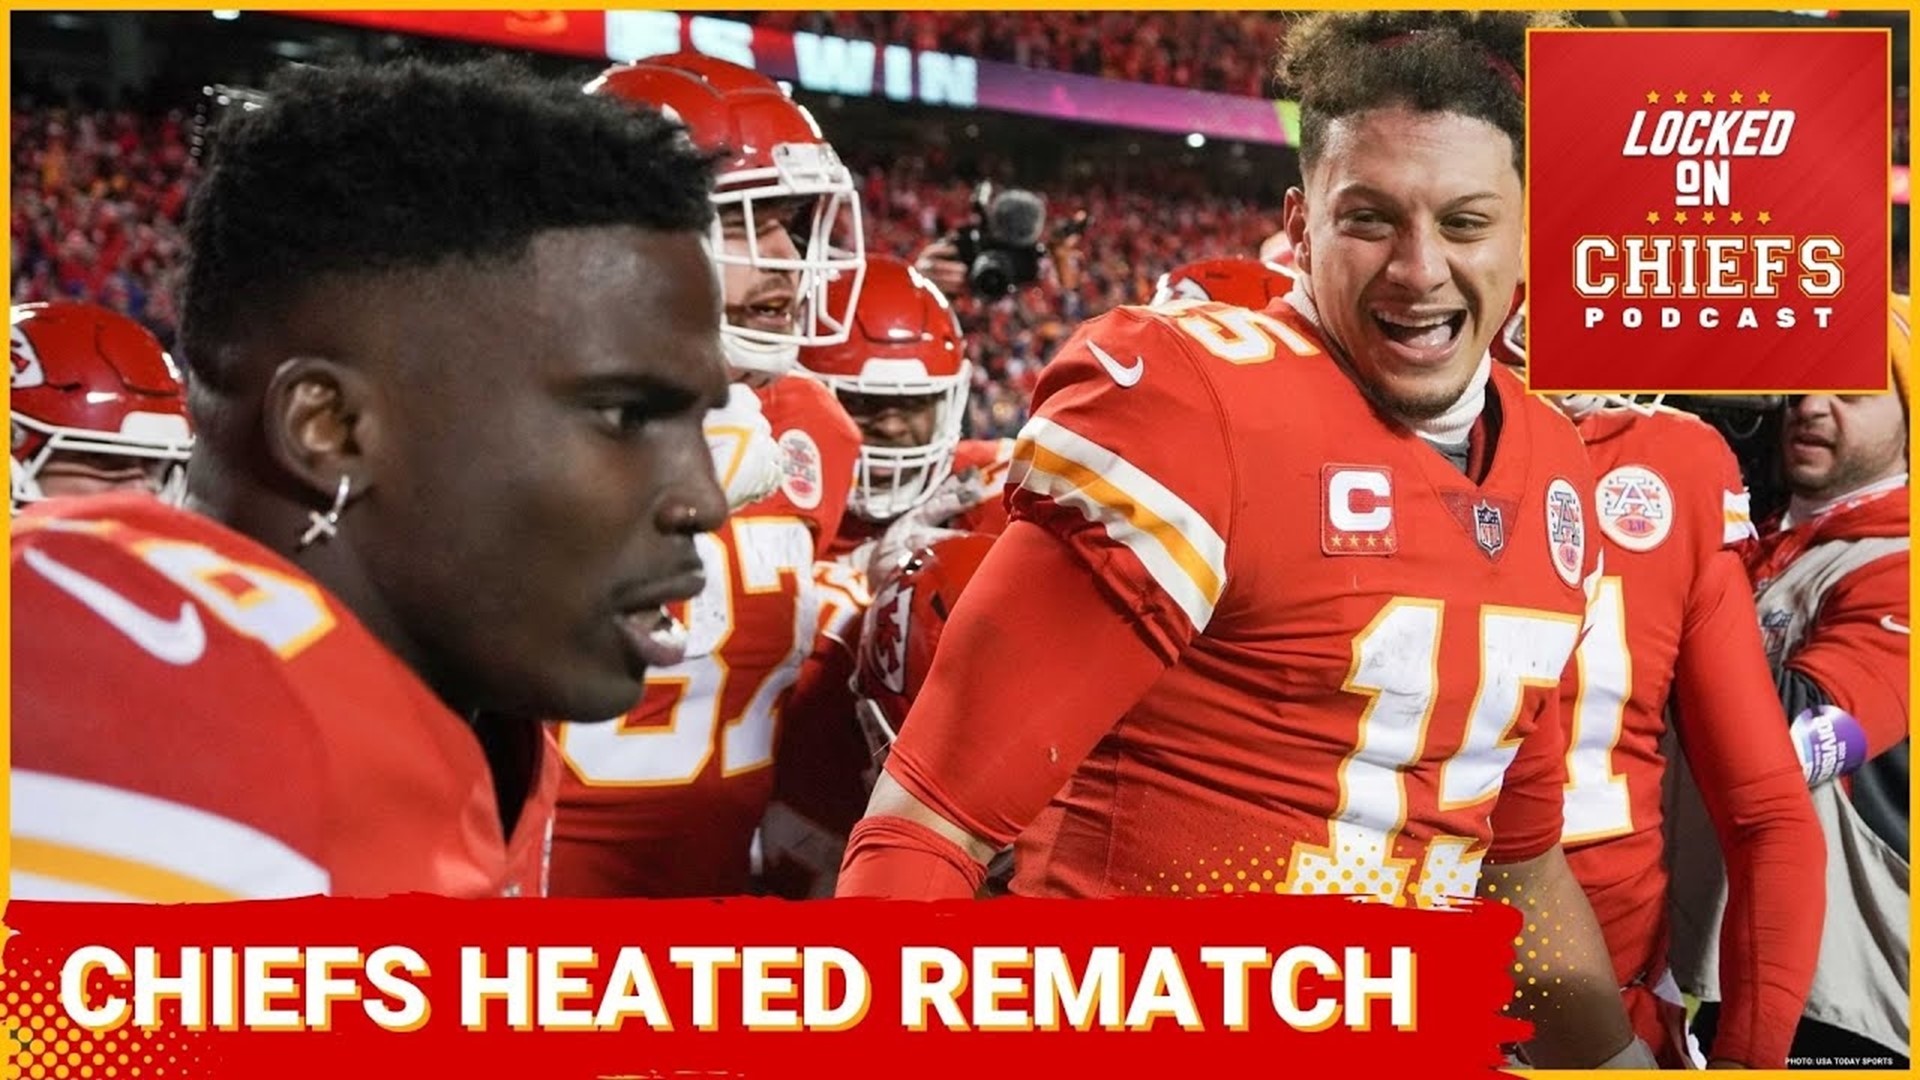 The Kansas City Chiefs host the Dolphins on Saturday in a game in subzero temperatures.